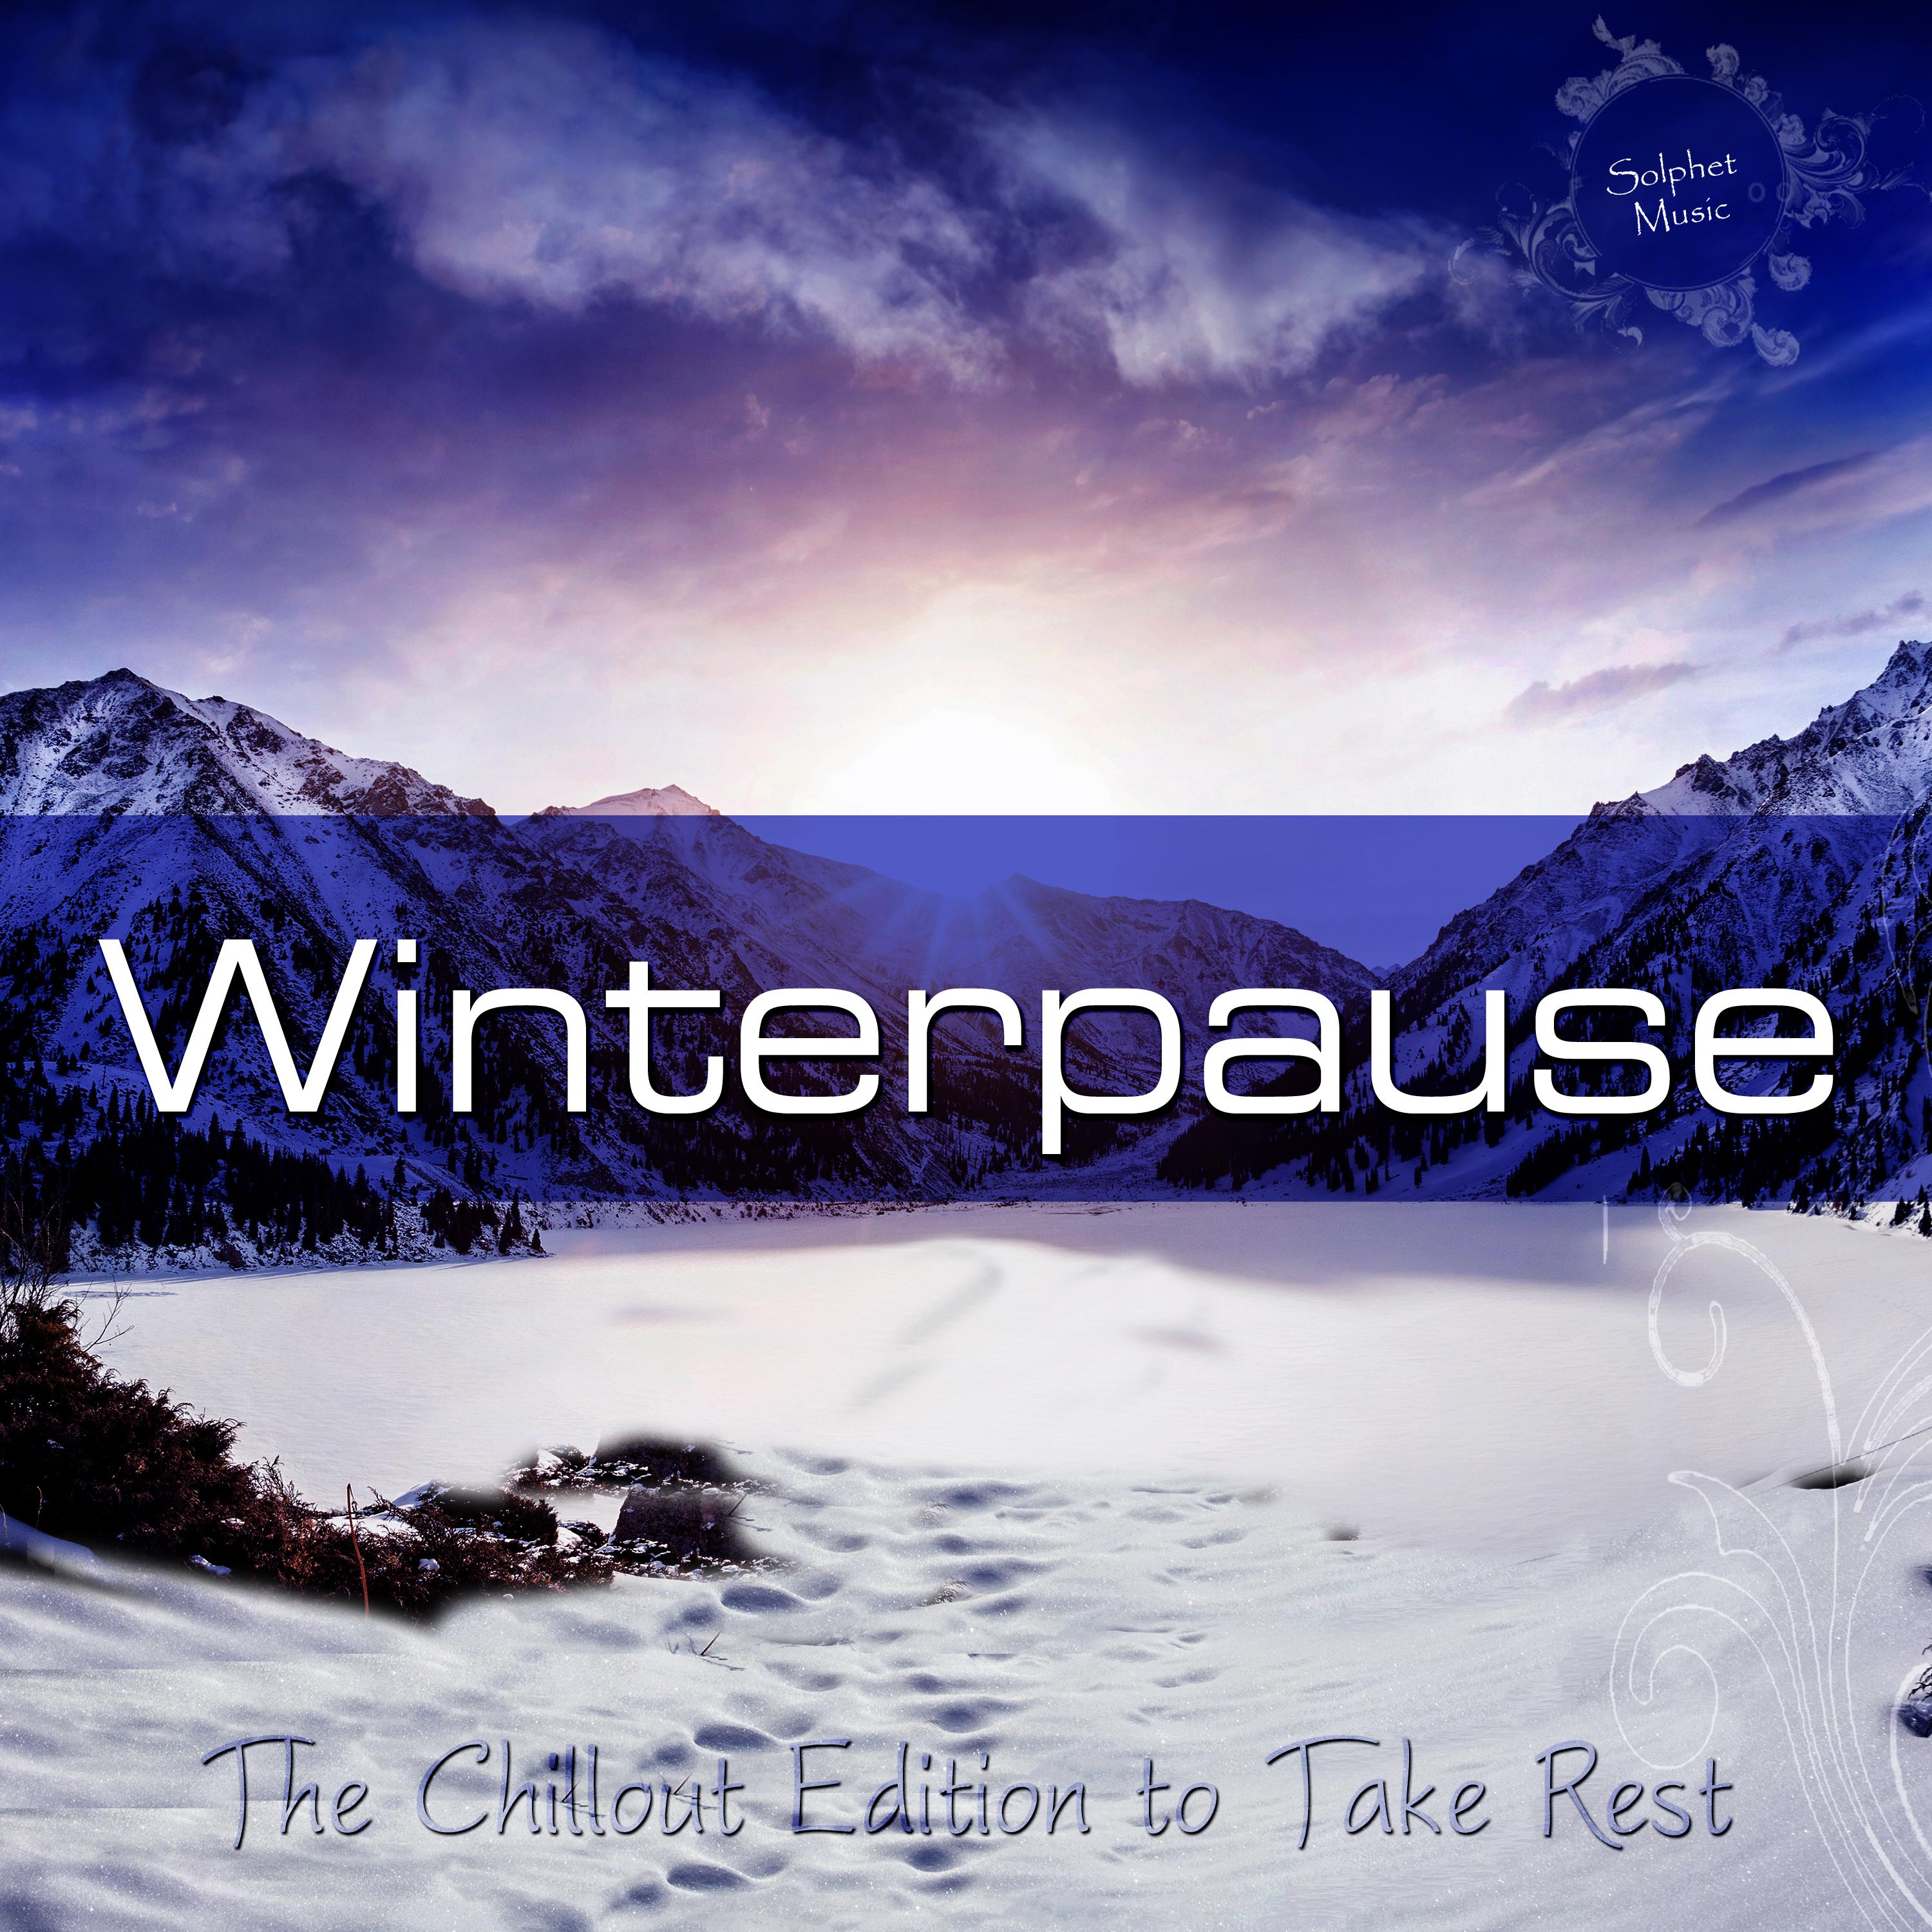 Winterpause - The Chillout Edition to Take Rest